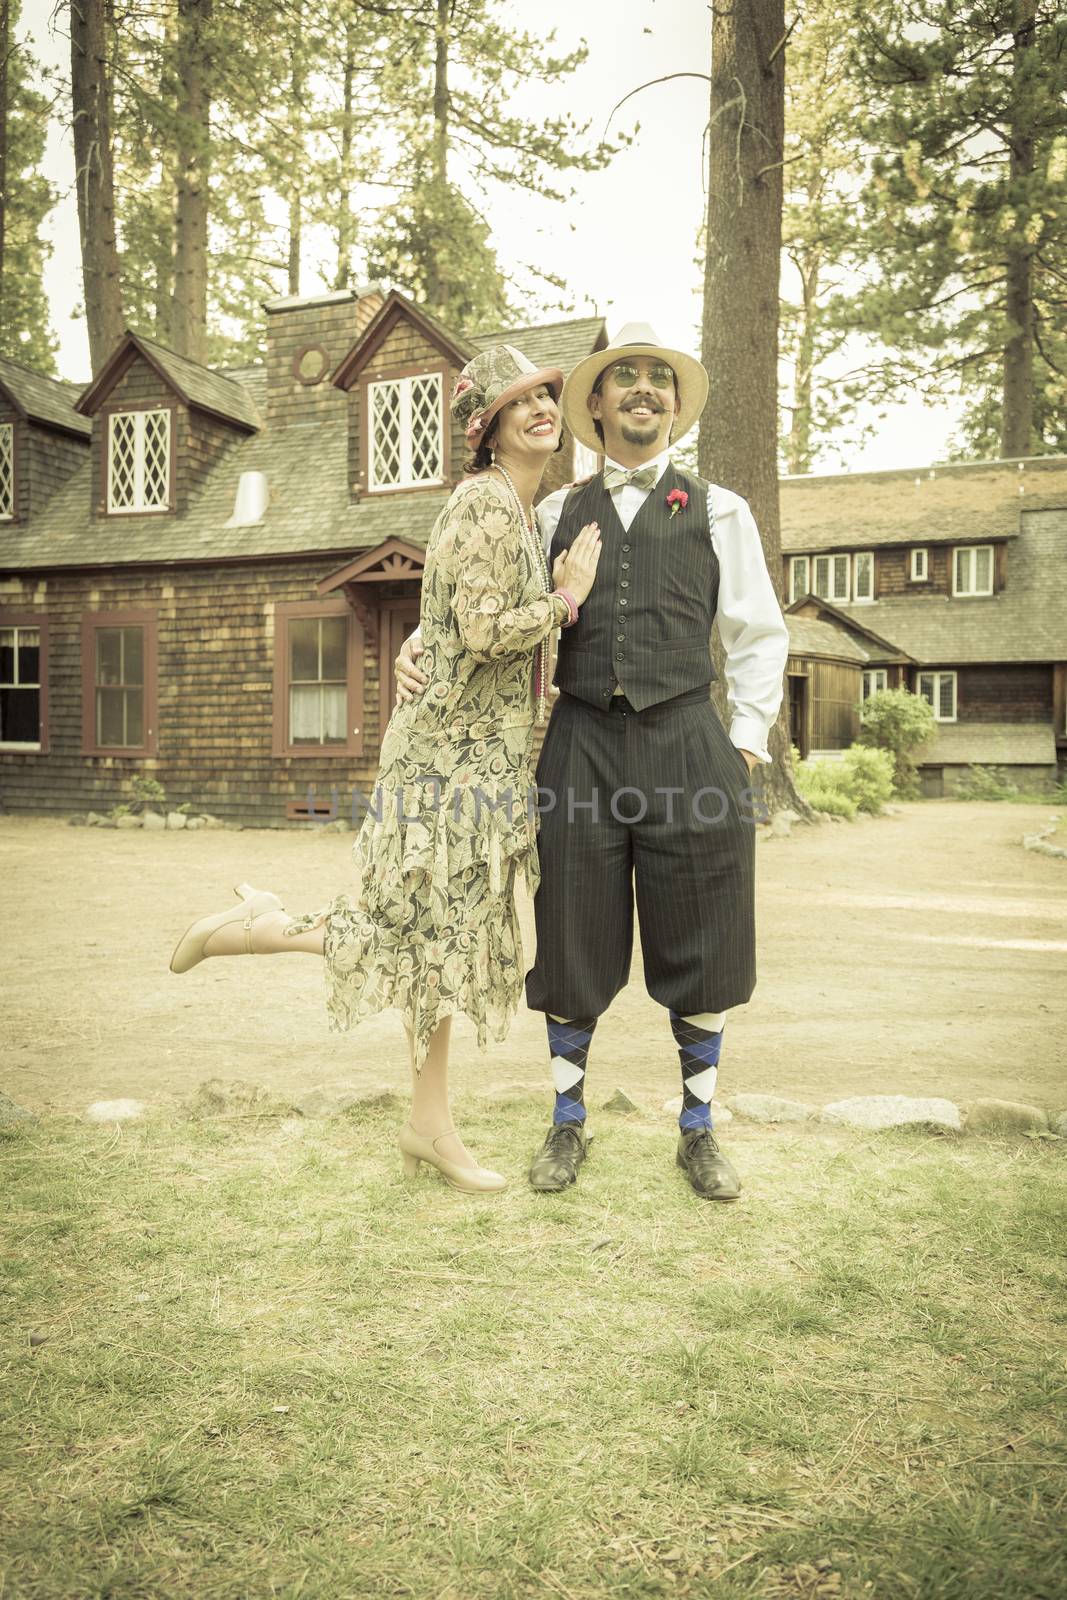 1920s Dressed Romantic Couple in Front of Old Cabin by Feverpitched